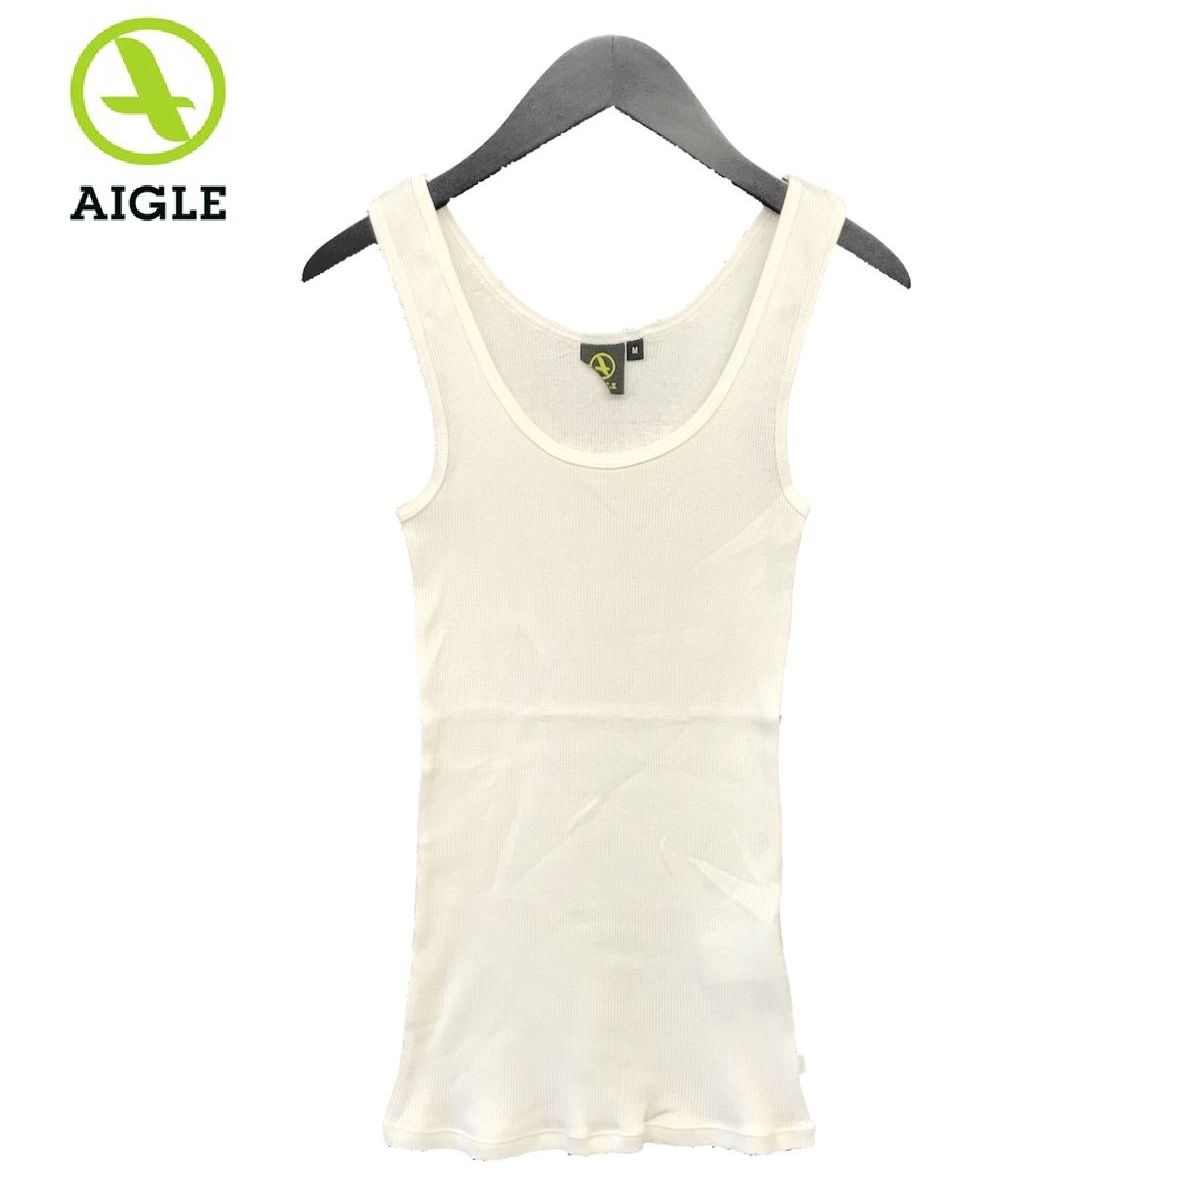  unused goods AIGLE Aigle stretch plain no sleeve cut and sewn tanker tank top innerwear lady's outdoor M